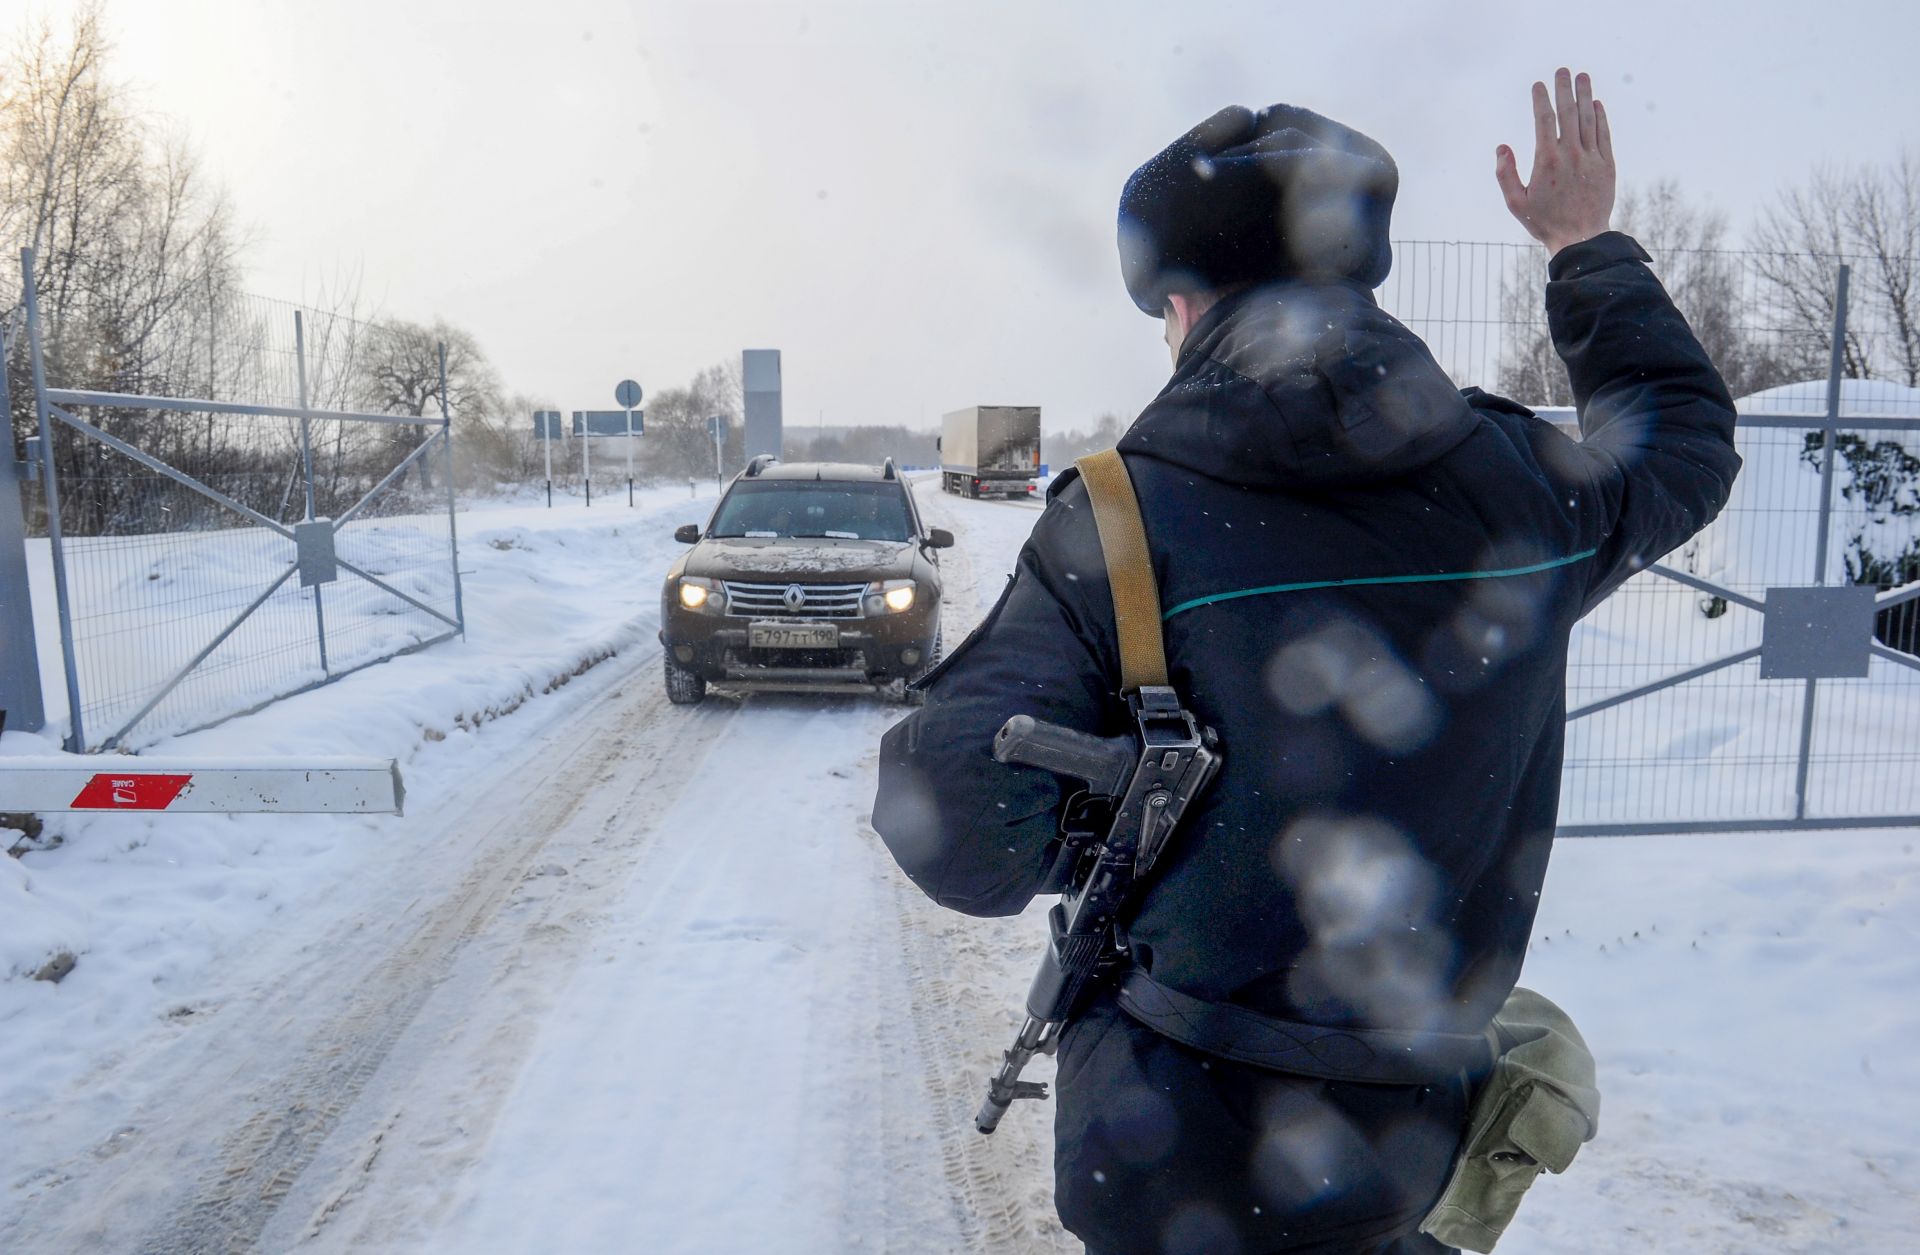 A guard stops a vehicle at Russia's Troyebortnoye border checkpoint on the Russian-Ukrainian border.